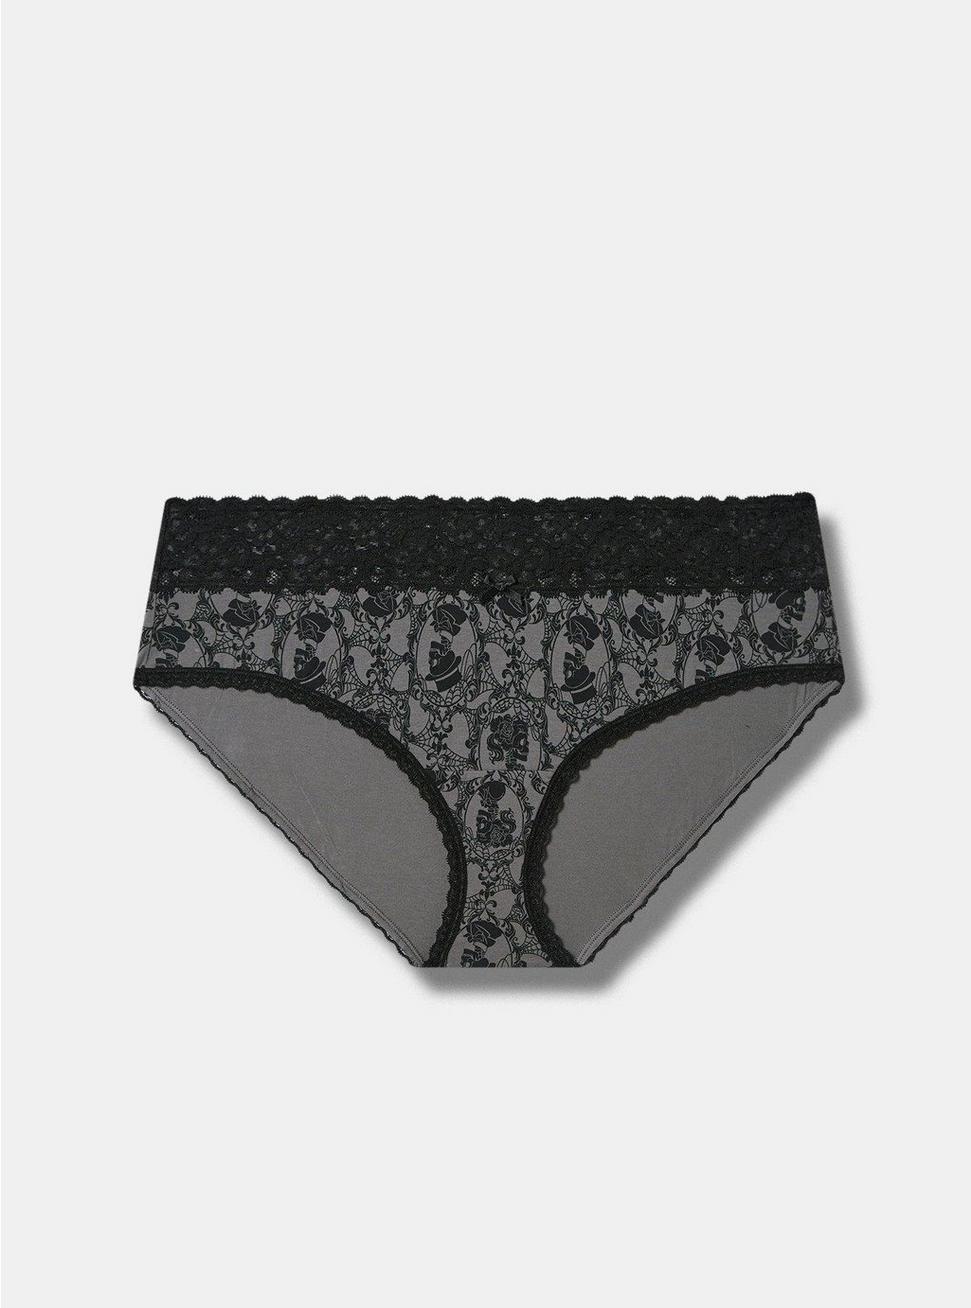 Cotton Mid-Rise Hipster Lace Trim Panty, SKULL CAMEO LAVA SMOKE, hi-res